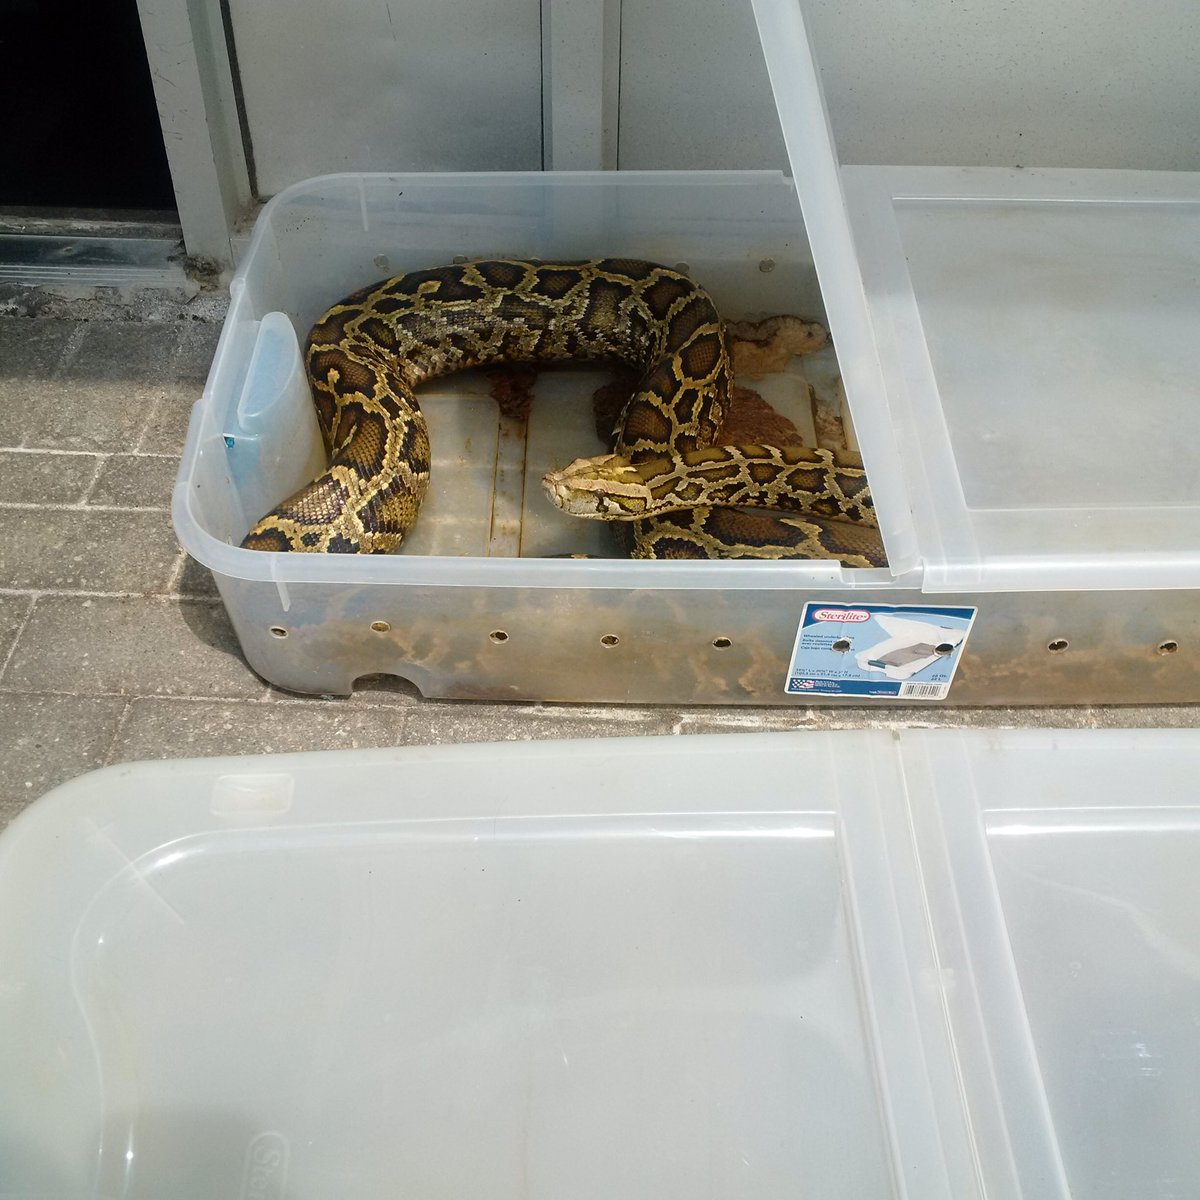 York Regional Police say two snakes were left outside a Newmarket reptile store on July 17.